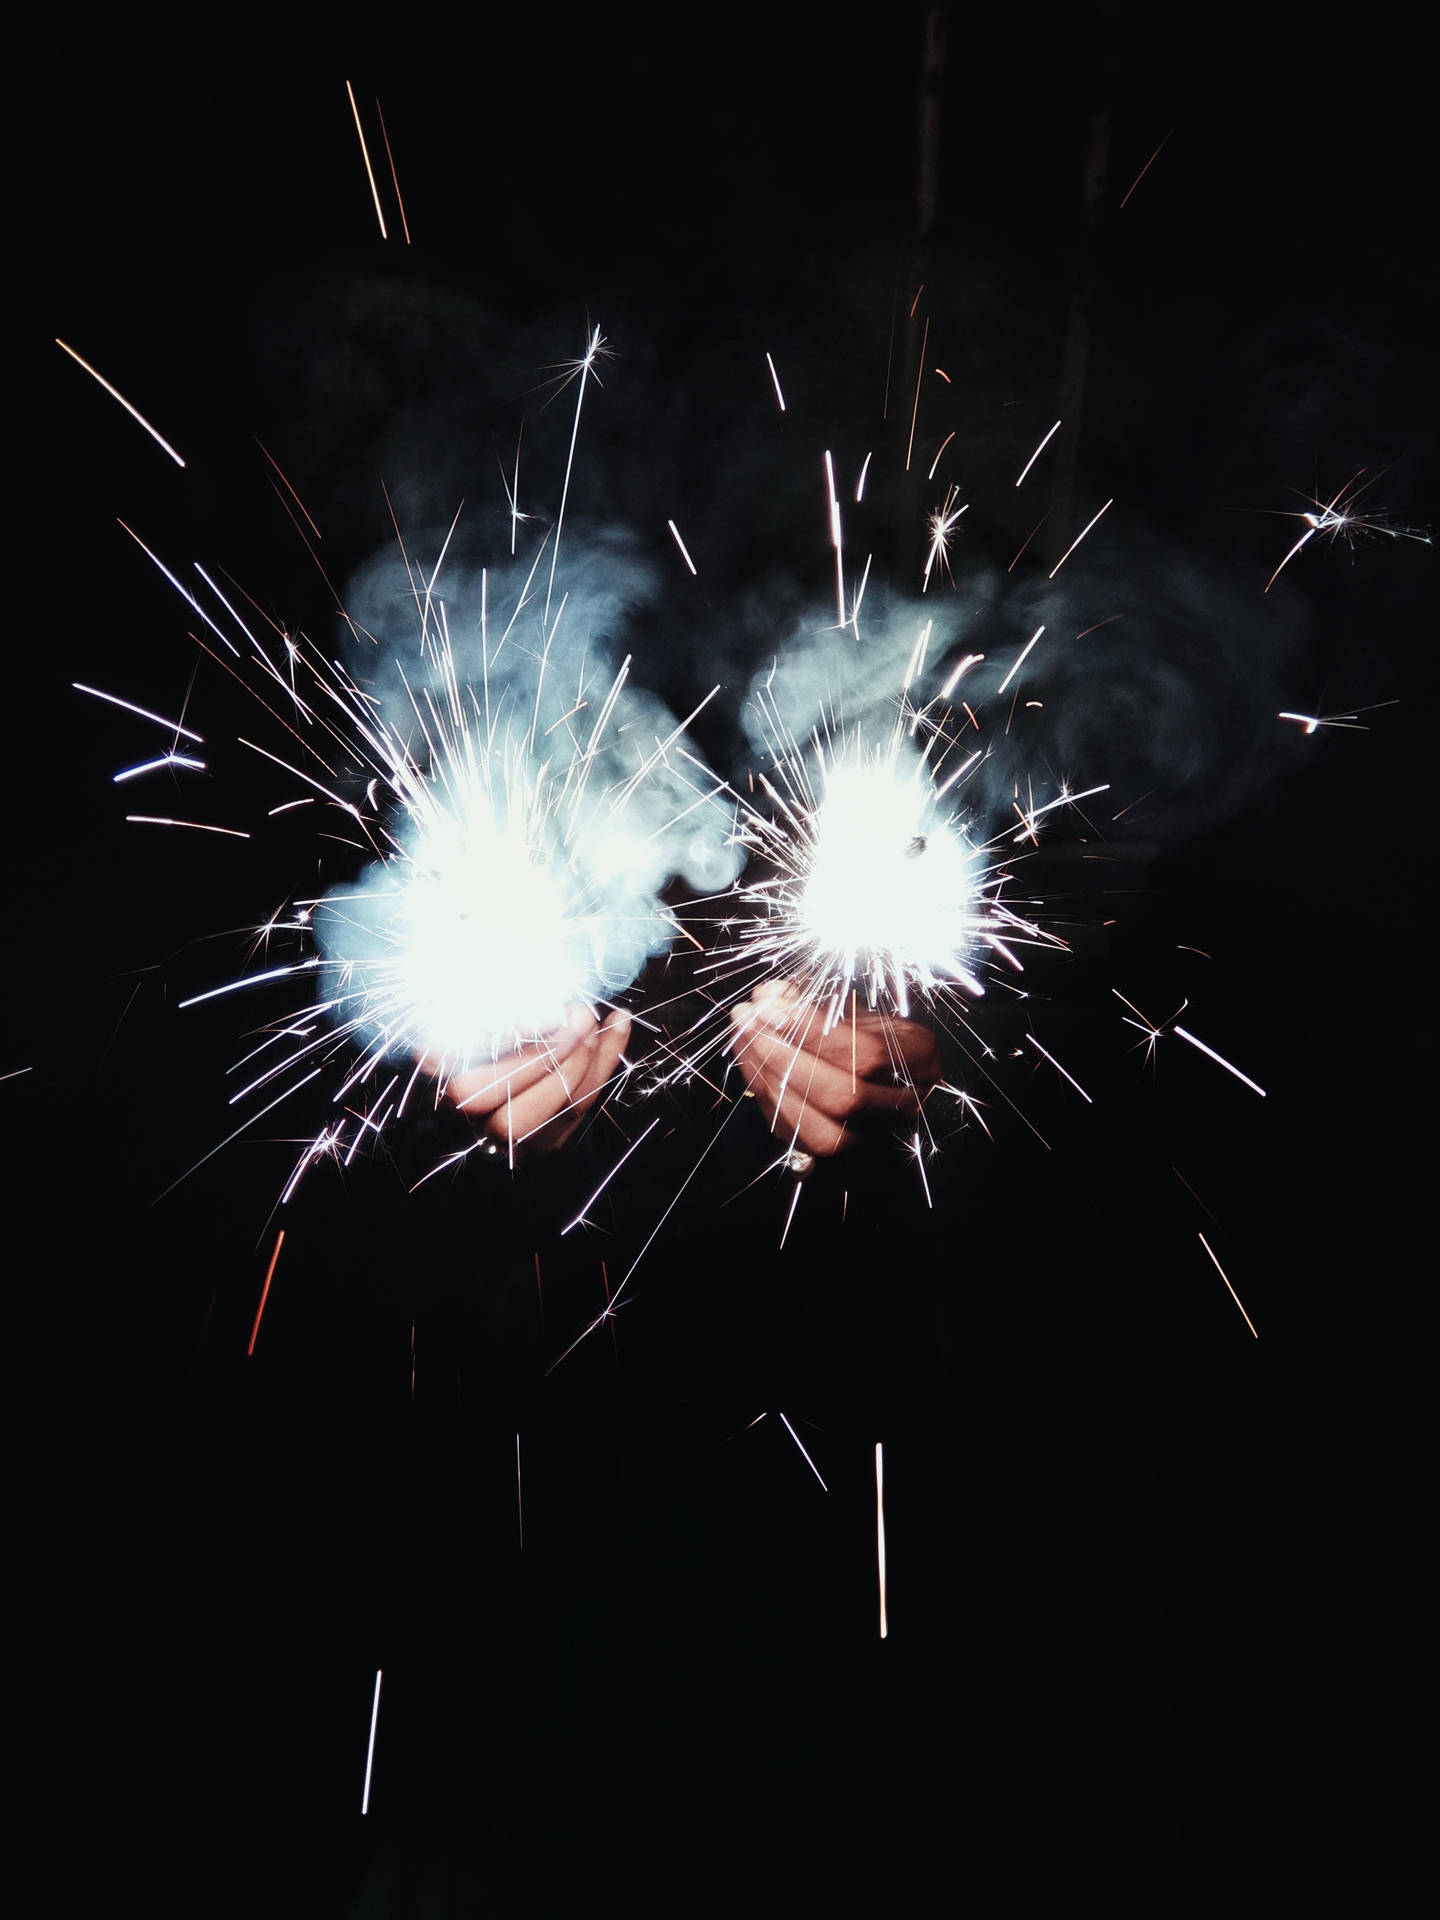 Mesmerizing 4k Quality Sparklers Display On Iphone Wallpaper